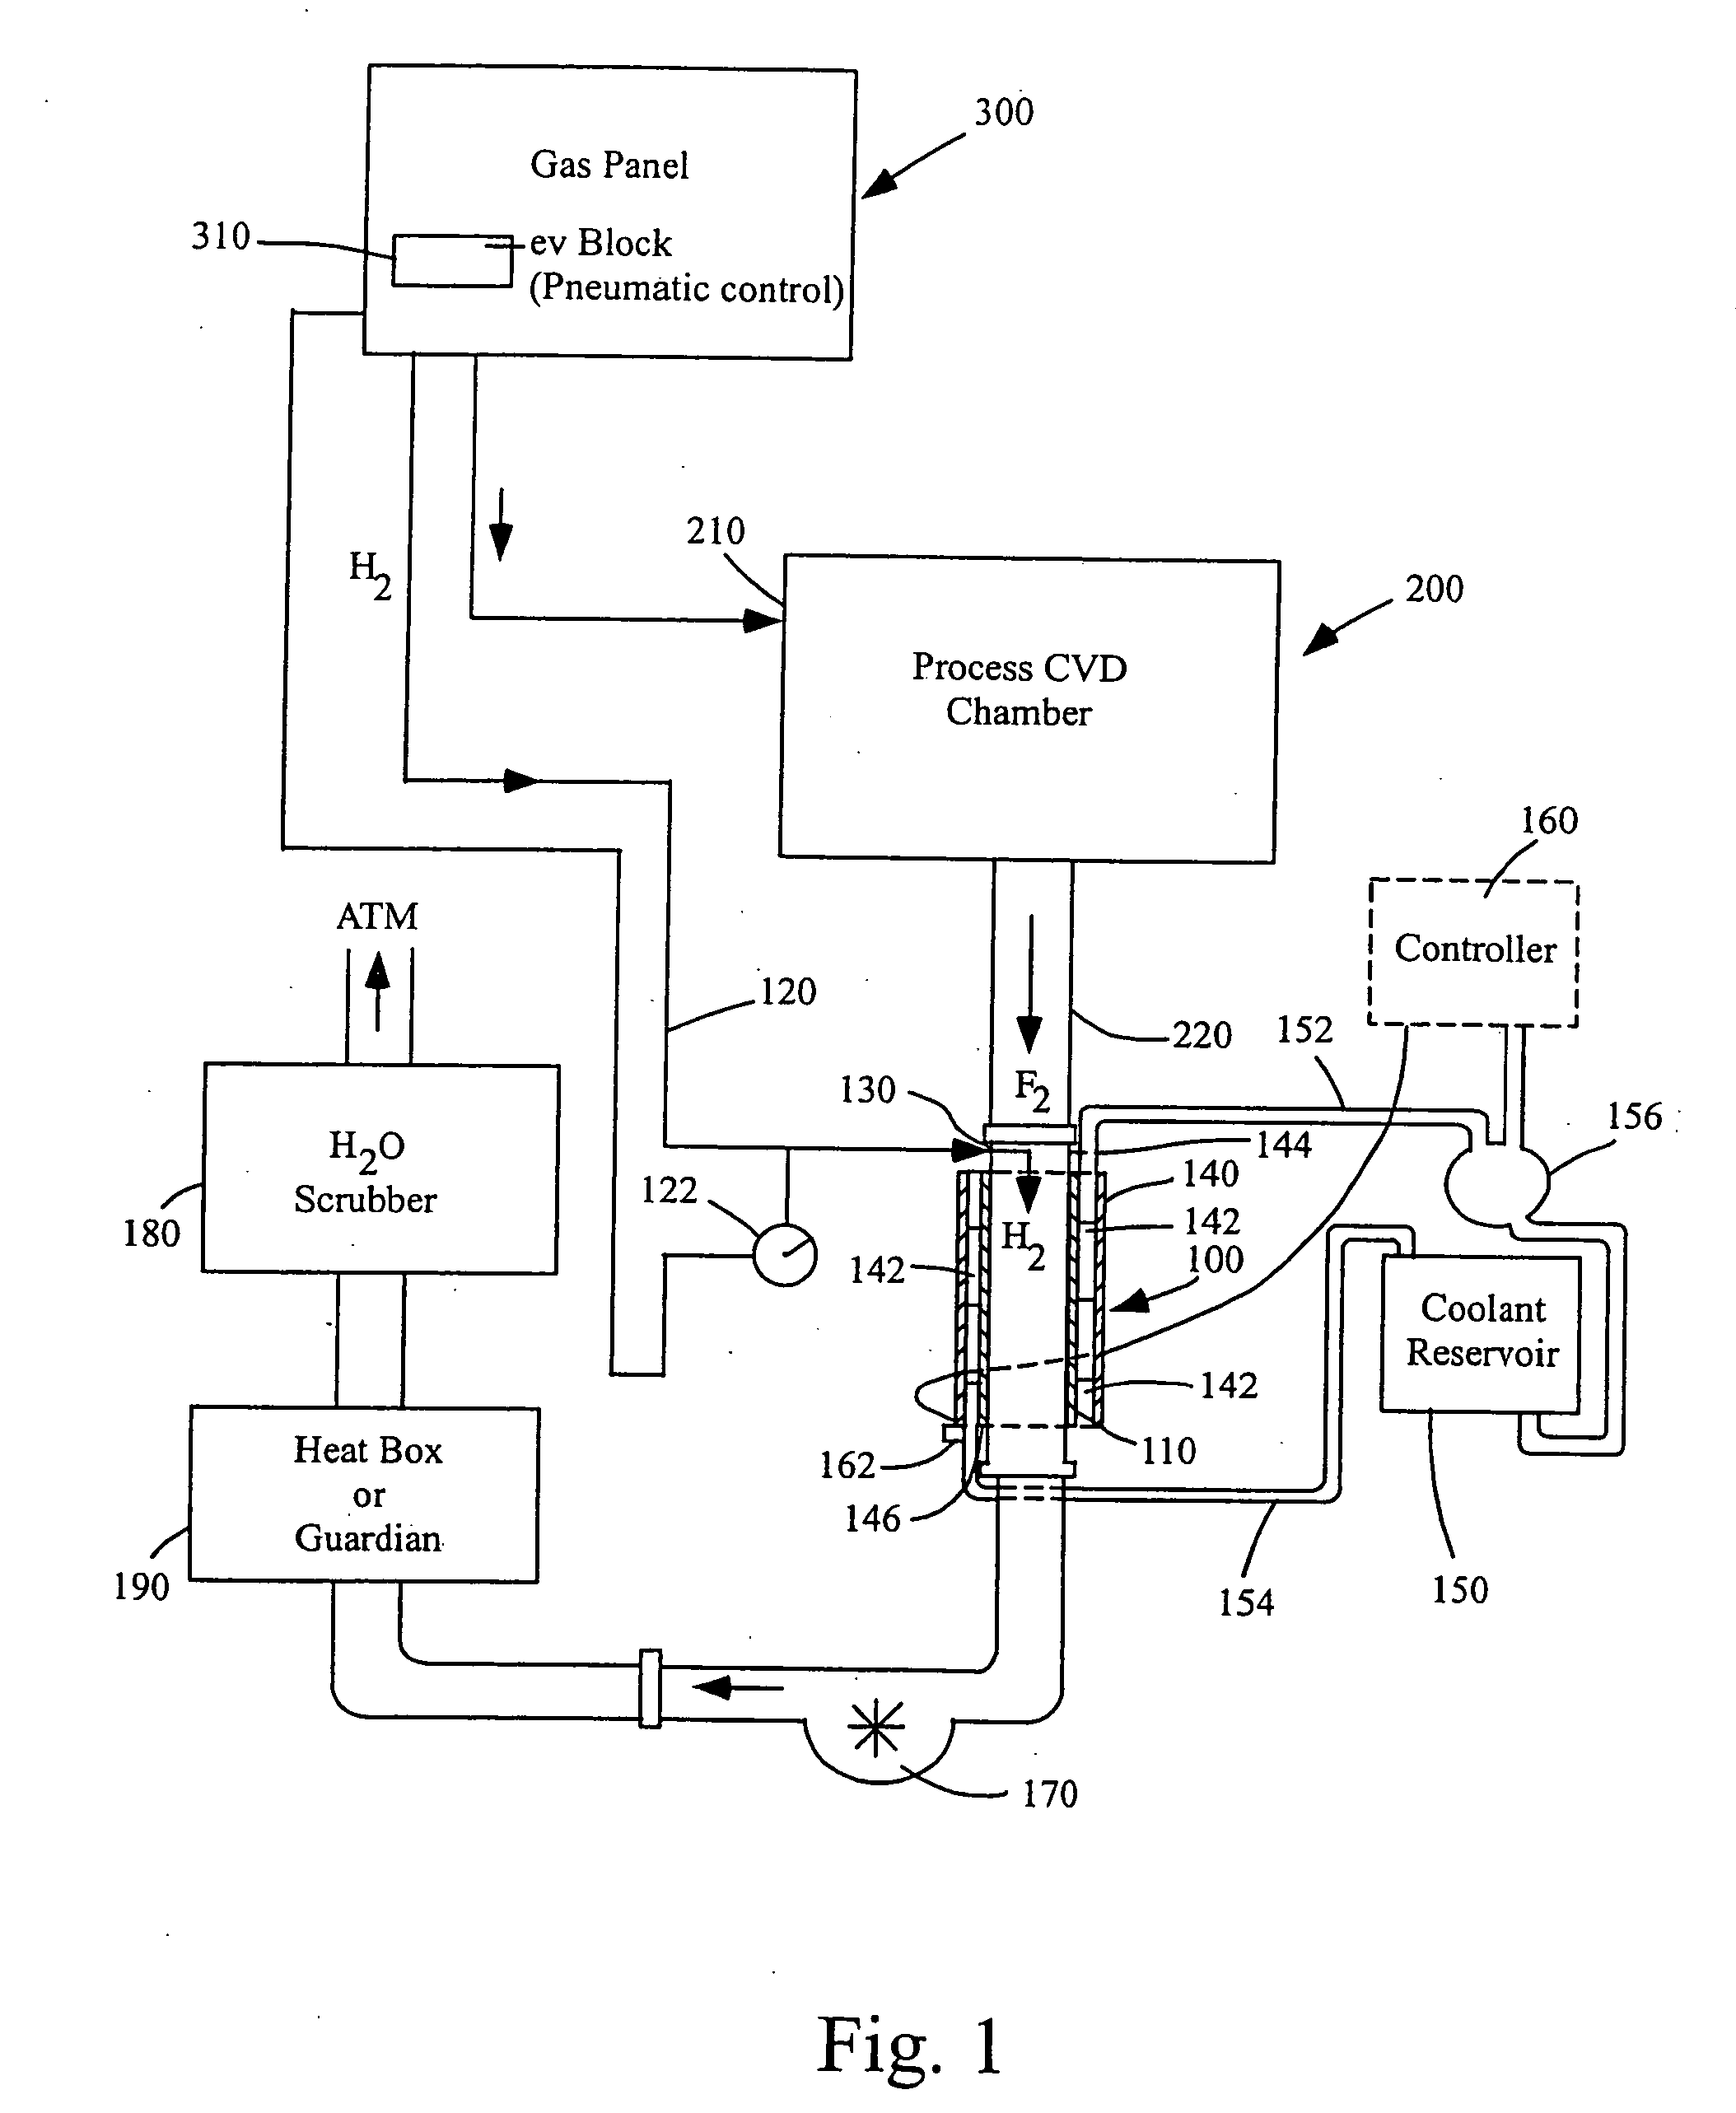 Apparatus for abatement of by-products generated from deposition processes and cleaning of deposition chambers